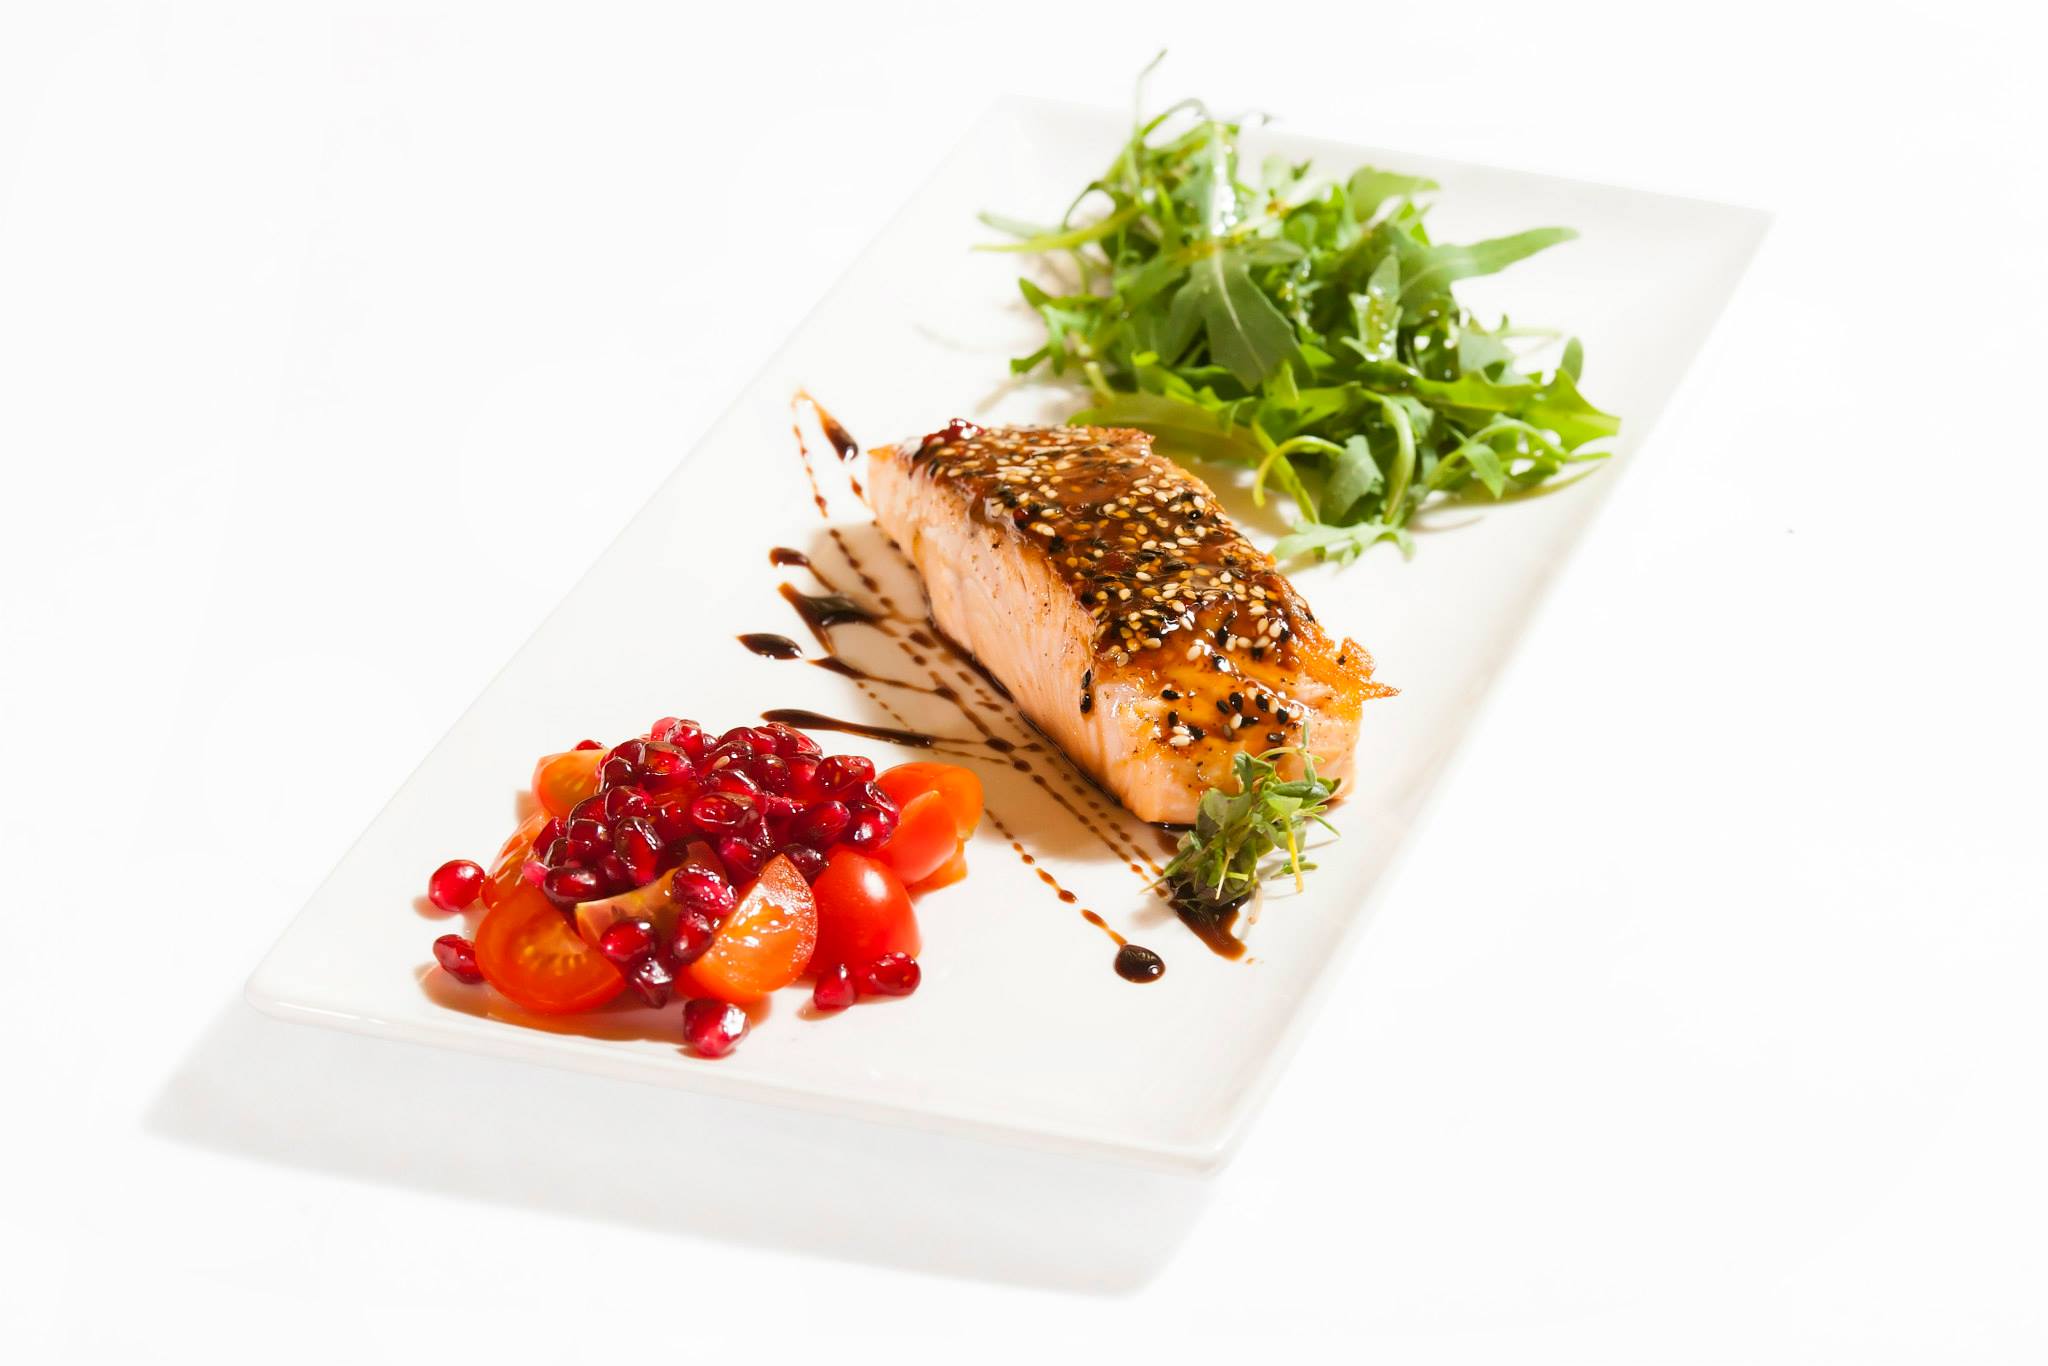 Grilled salmon with rucola salad with pomegranate and lemon grass sauce